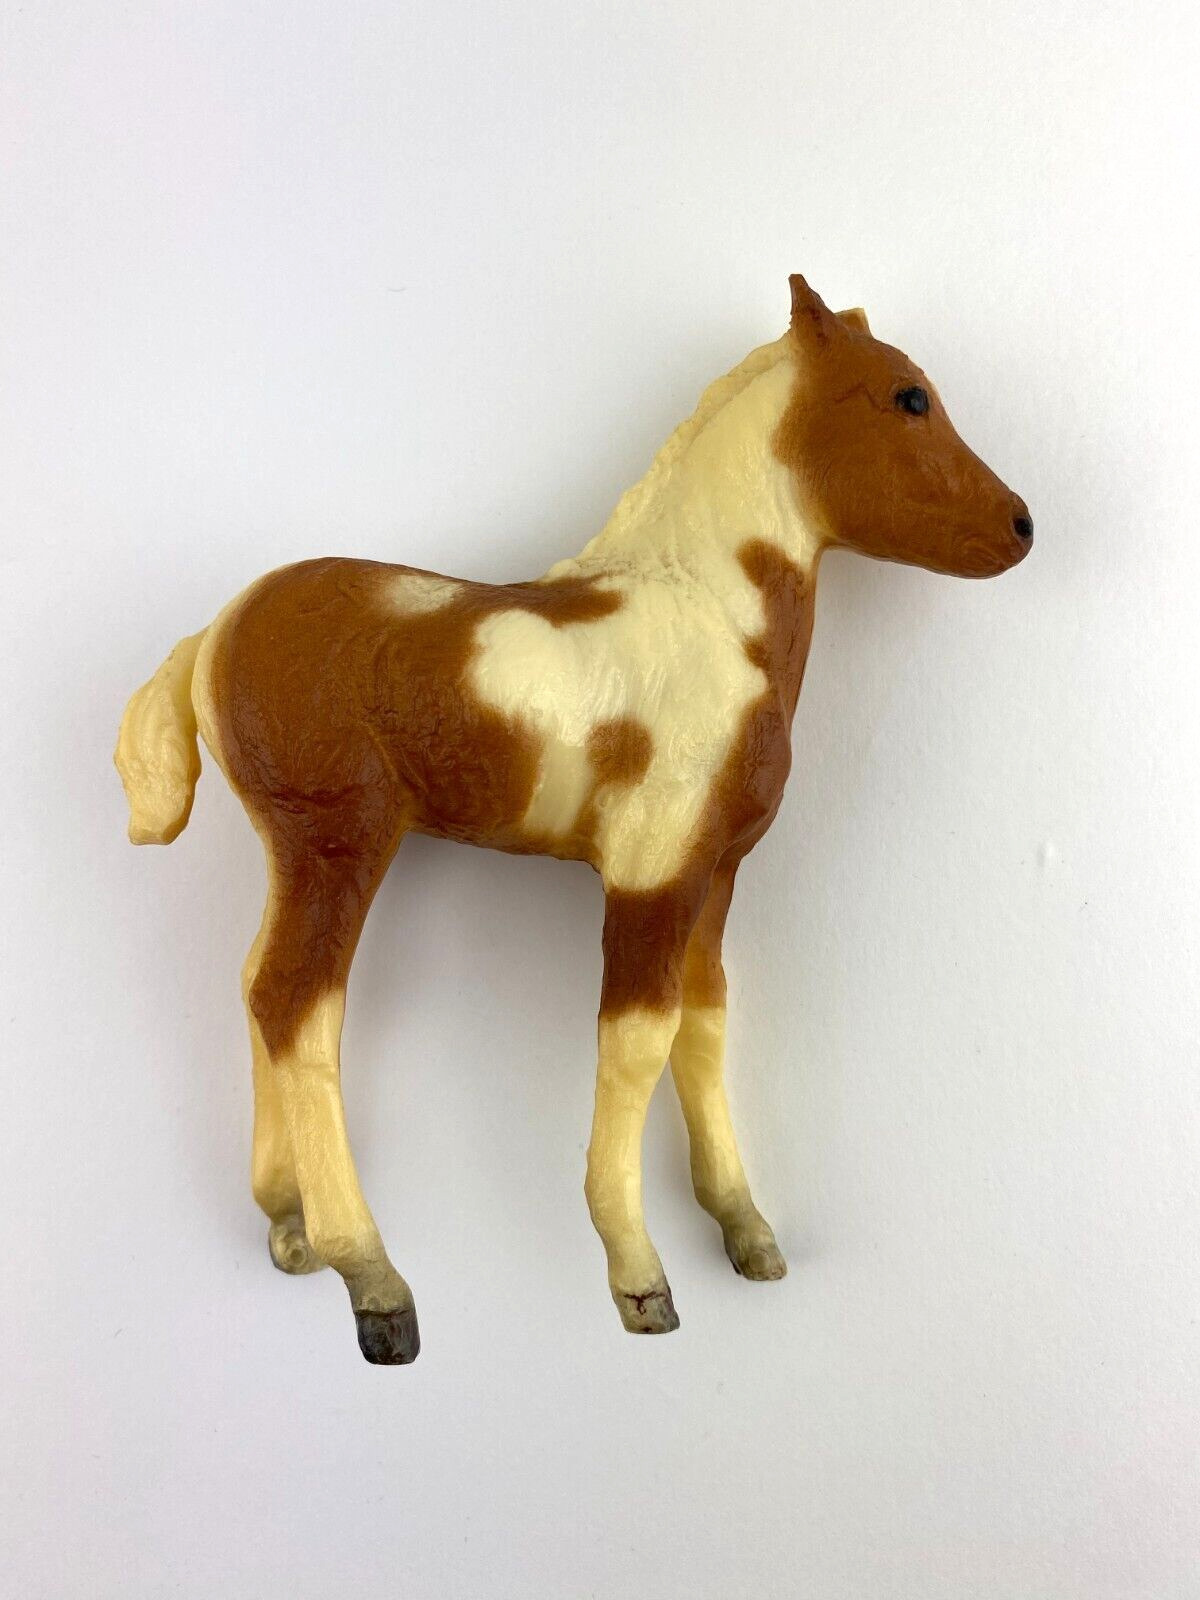 Vintage Breyer Horse #19 Marguerite Henry’s Stormy Misty Chincoteague Foal